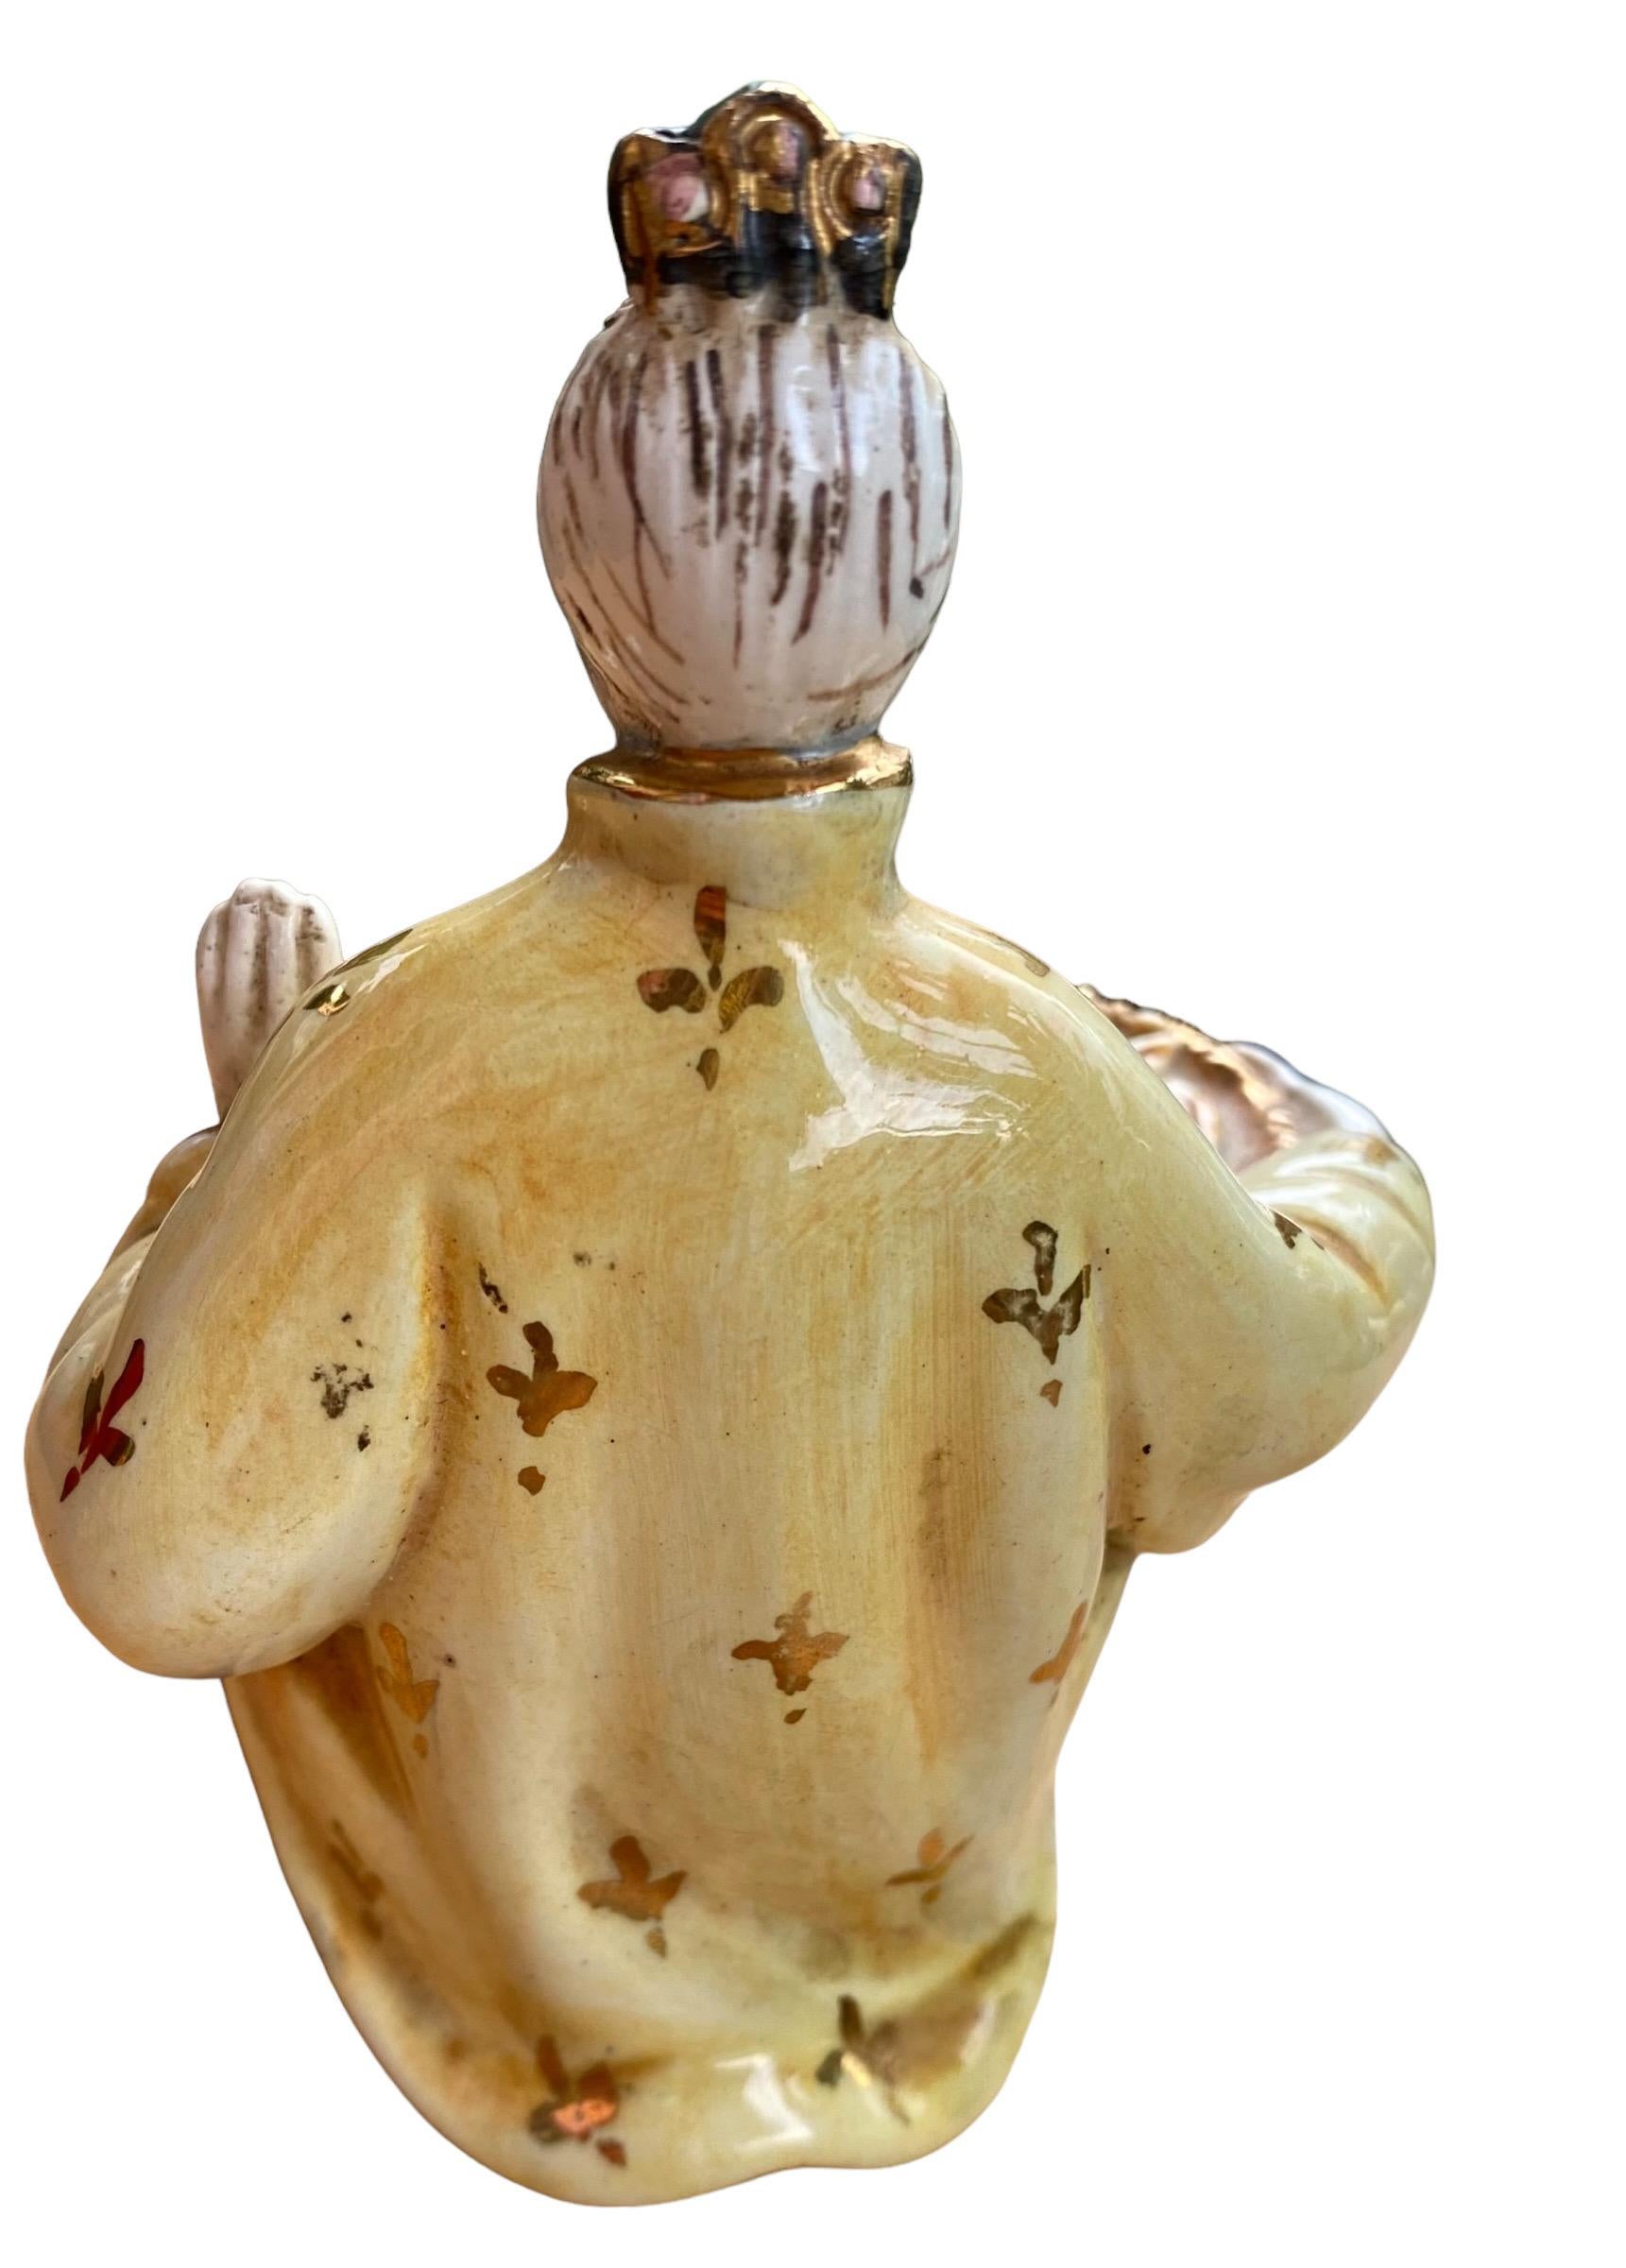 Eugenio Pattarino ceramic statue.
Beautiful statuette depicting an Asian girl holding a fruit basket by Eugenio Pattarino
Sculptor and ceramist Eugenio Pattarino was born in Florence in 1885 where he attended the Academy of Fine Arts, a pupil of